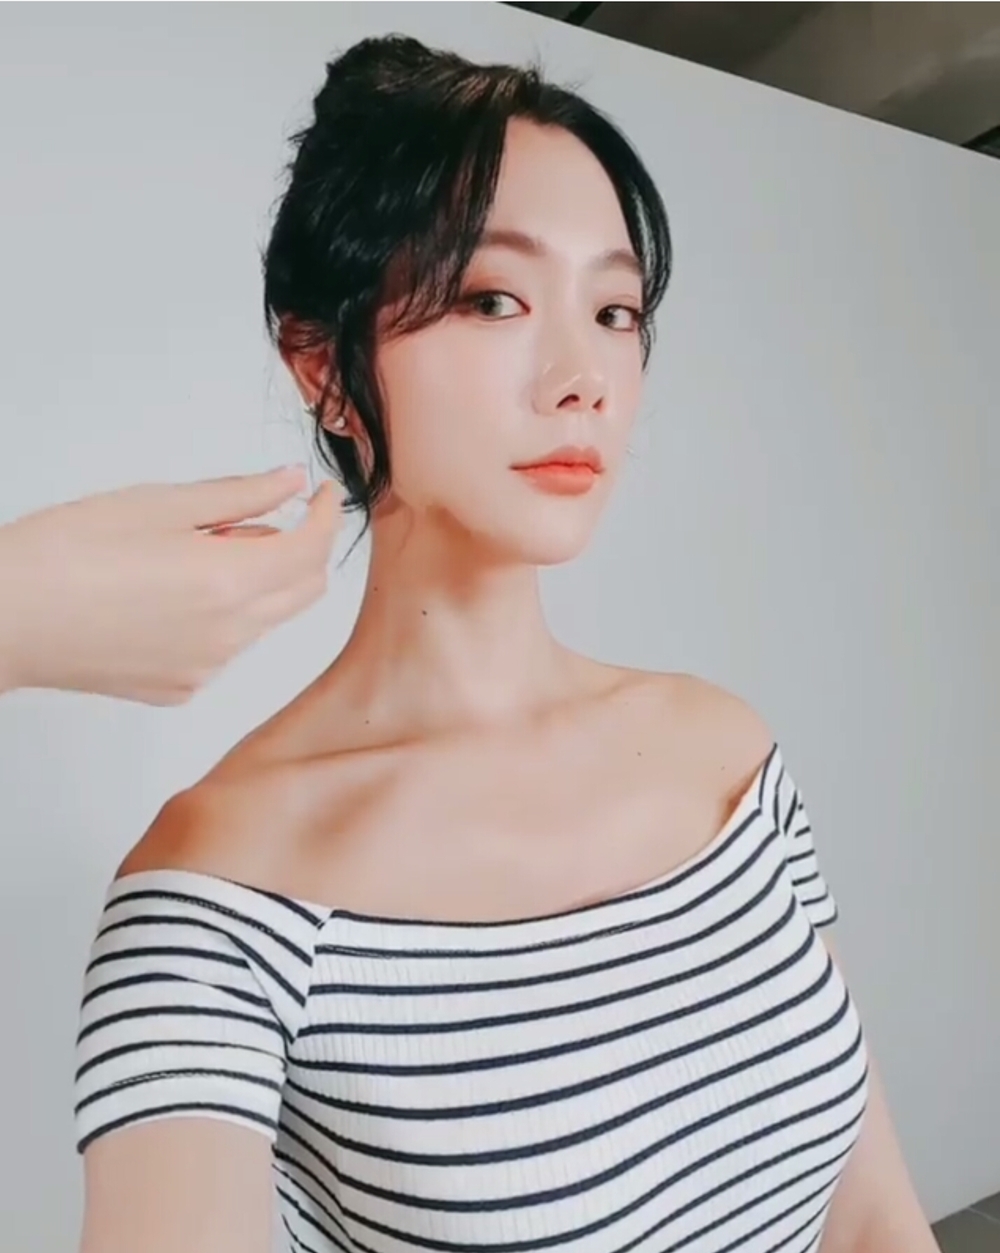 Claras current situation has been revealed.Actor Clara posted a Selfie video on her Instagram account on July 12.Clara in the video is wearing a hair styling. The volume emphasized on the striped top attracts attention.kim ye-eun